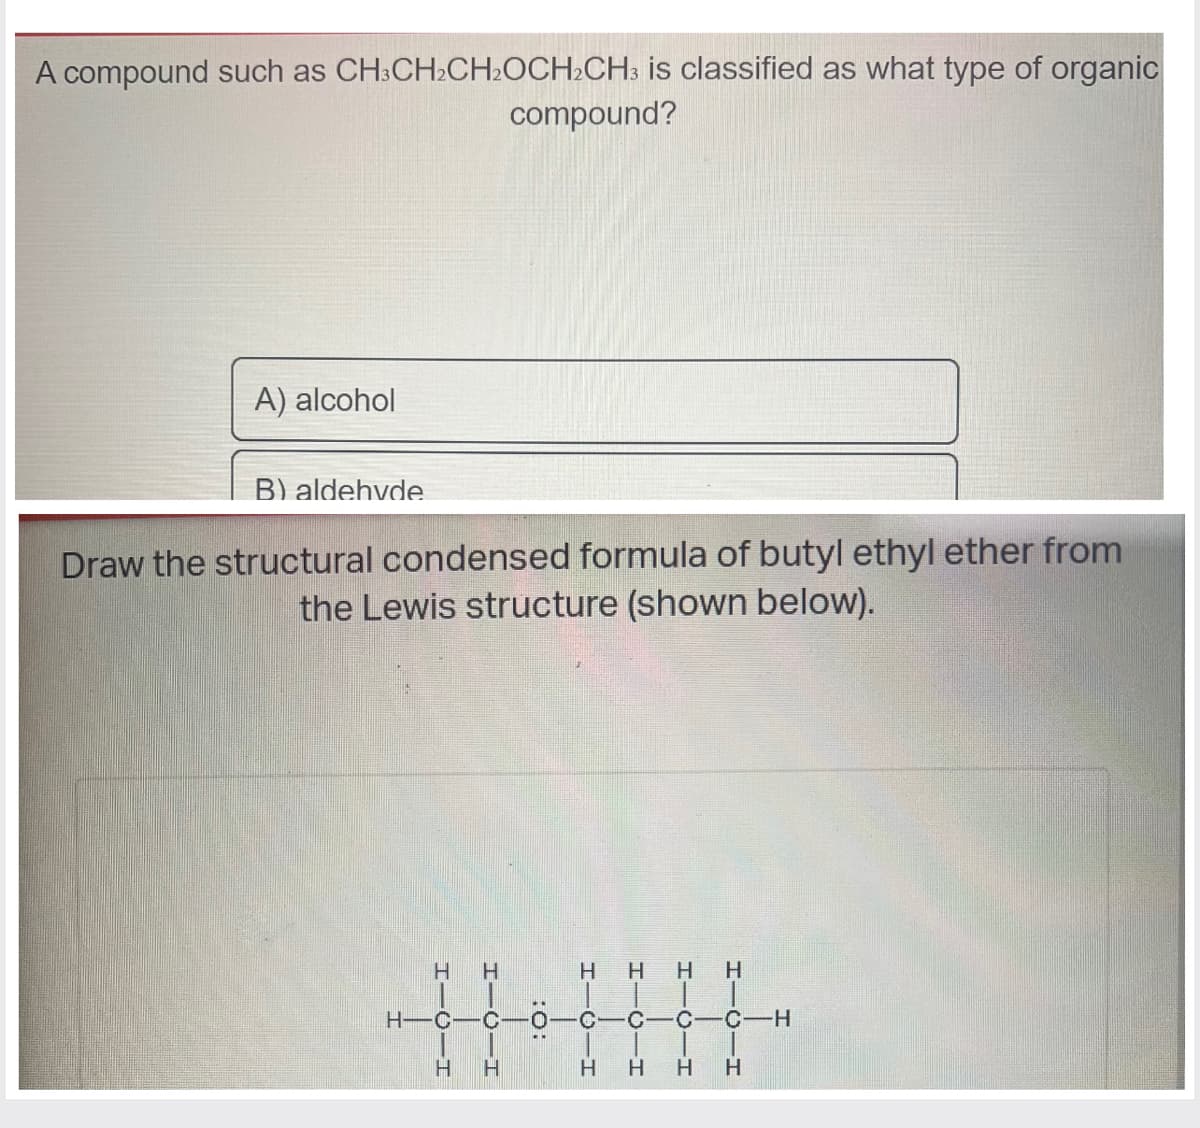 A compound such as CH3CH₂CH₂OCH₂CH3 is classified as what type of organic
compound?
A) alcohol
B) aldehyde
Draw the structural condensed formula of butyl ethyl ether from
the Lewis structure
(shown
below).
HIC-H
H-C
Н
H-O-H
C-0
:O:
Н
HIGIH
C
Н
HTCIH
н
H H
HICIH
C-C-CH
H